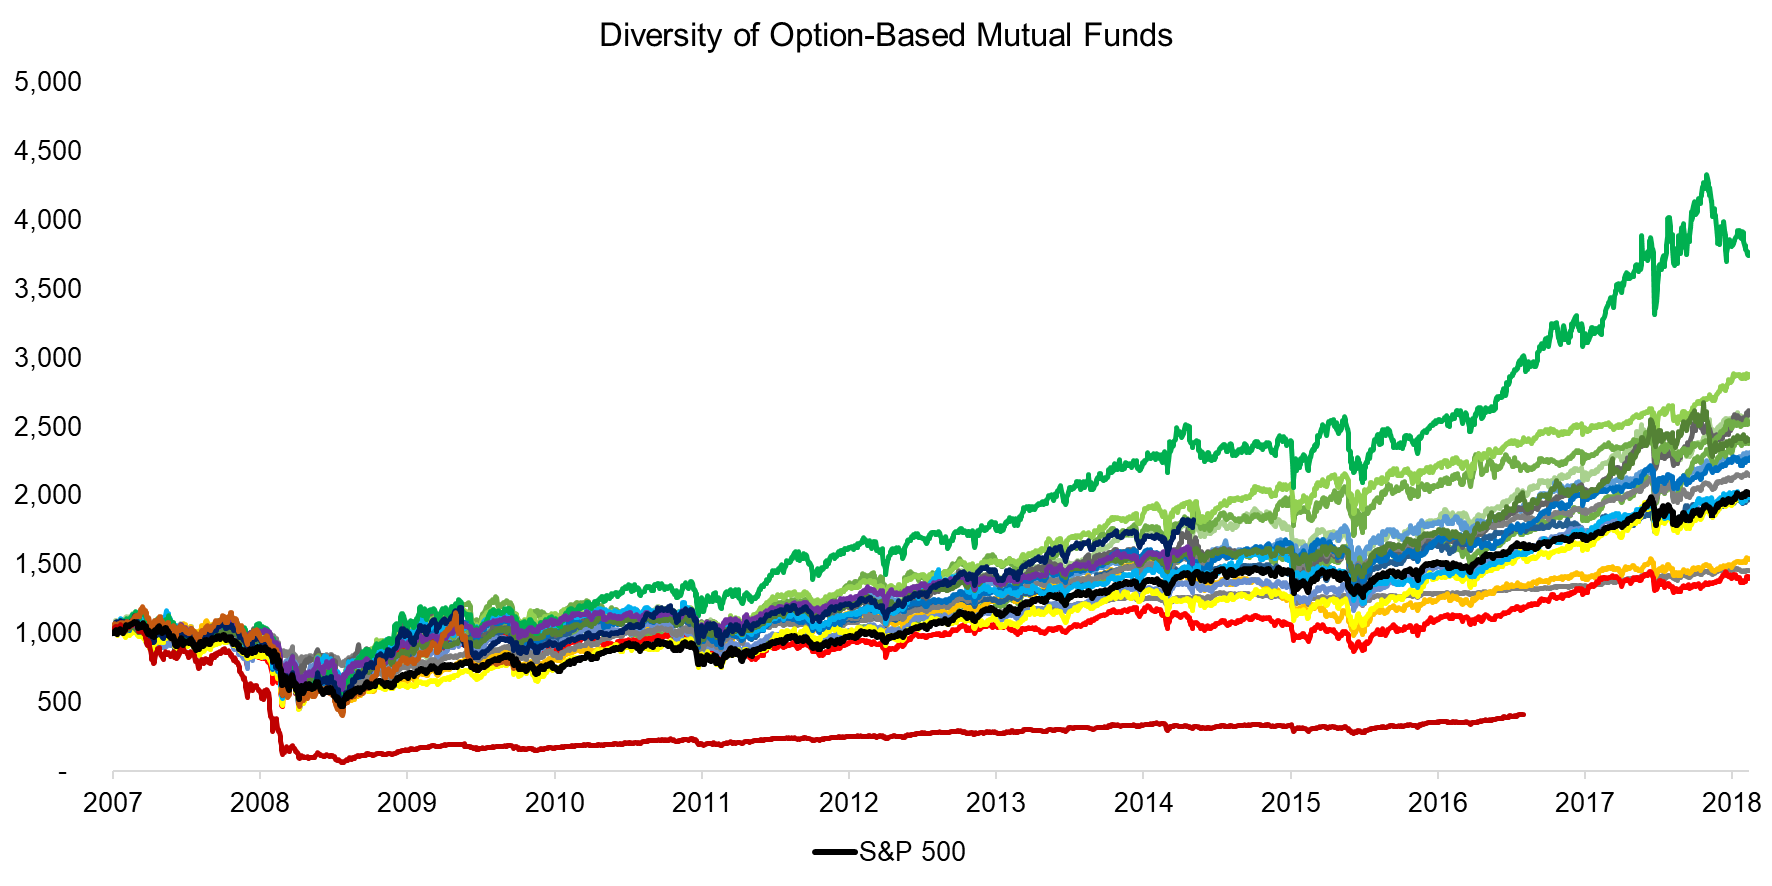 Diversity of Option-Based Mutual Funds